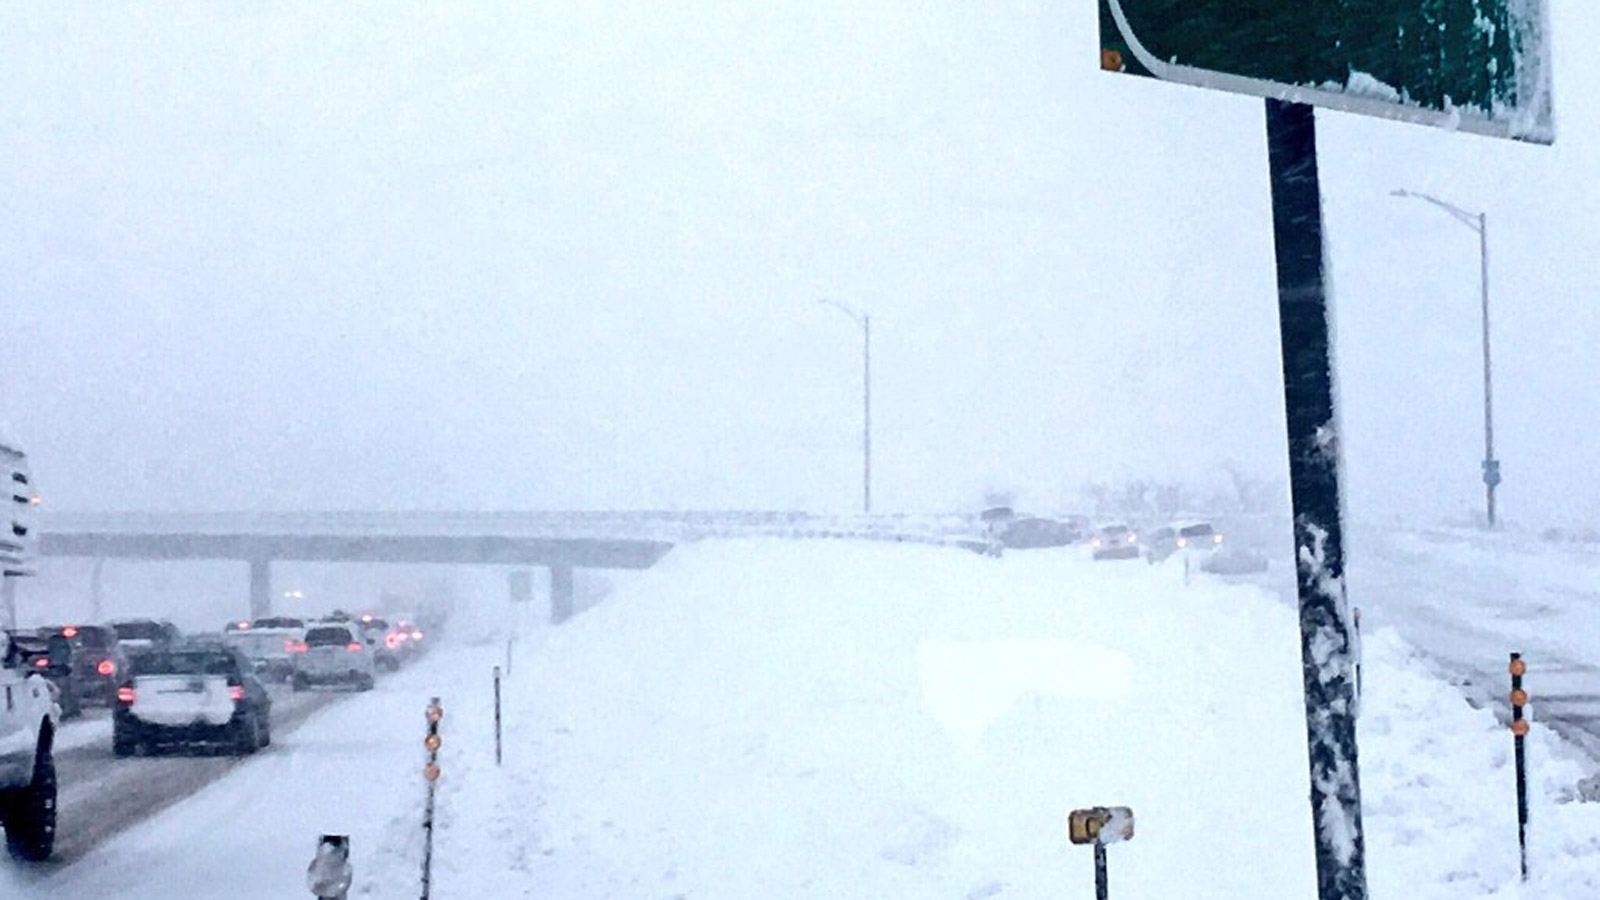 I-70 at US 6 (credit: Jamie Leary)